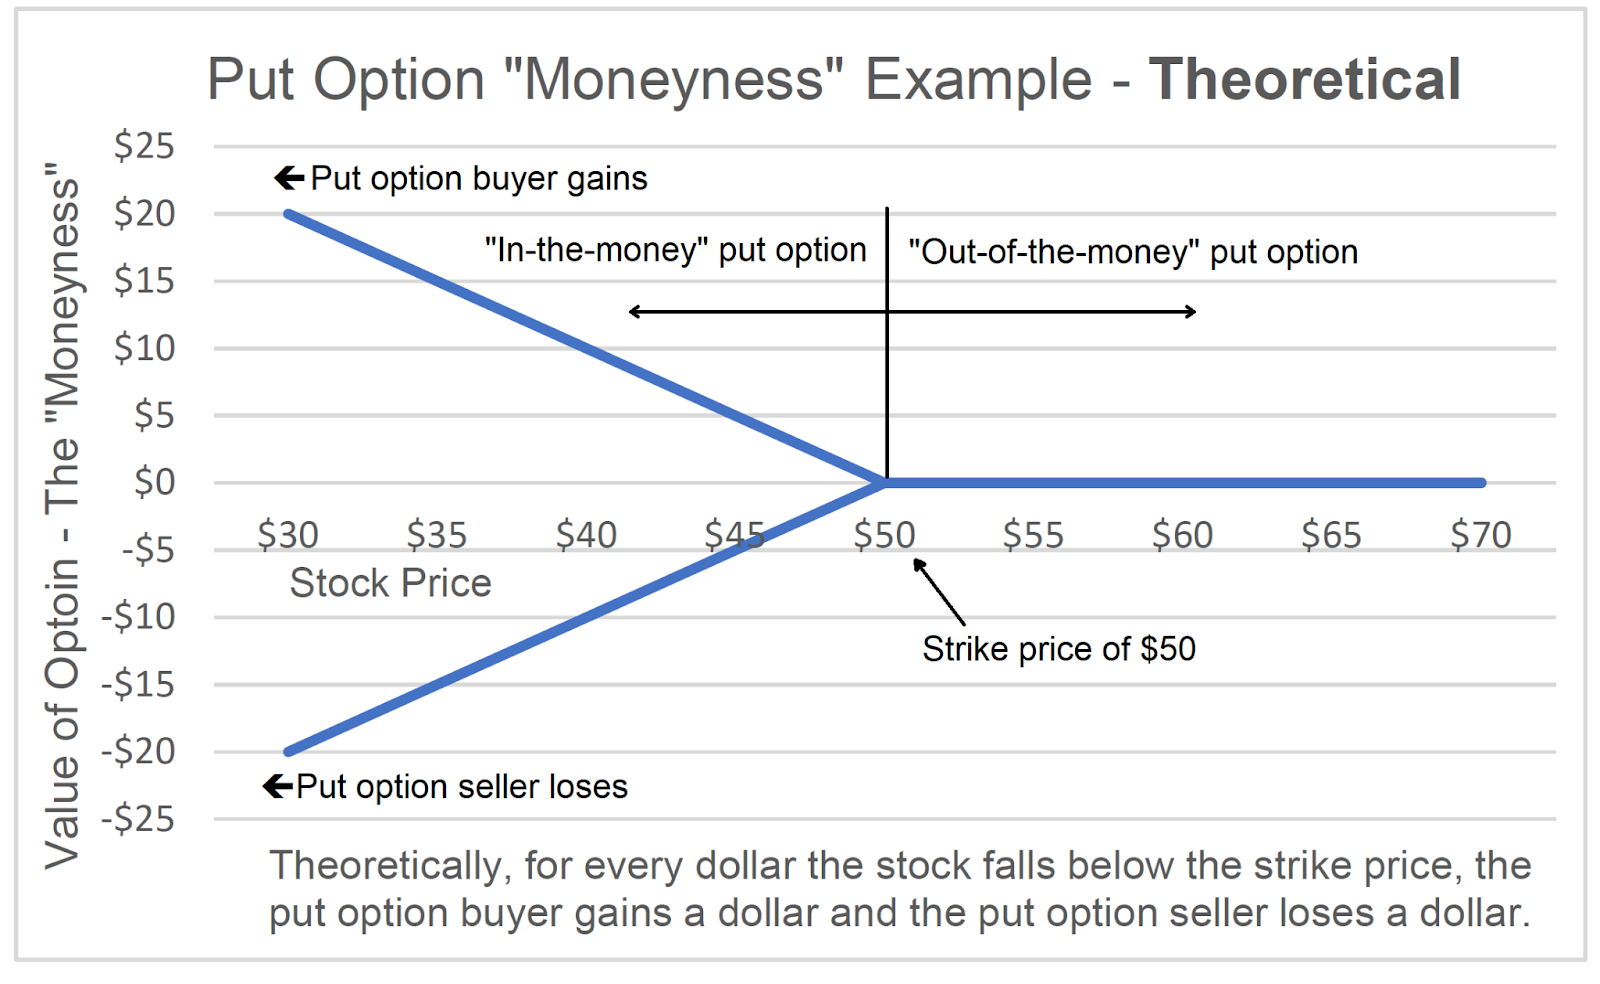 The put option buyer must see the stock fall below the strike price before the put option is "in-the-money." As the stock price falls below the strike price, the put option buyer begins to make money and the put option seller begins to lose money.